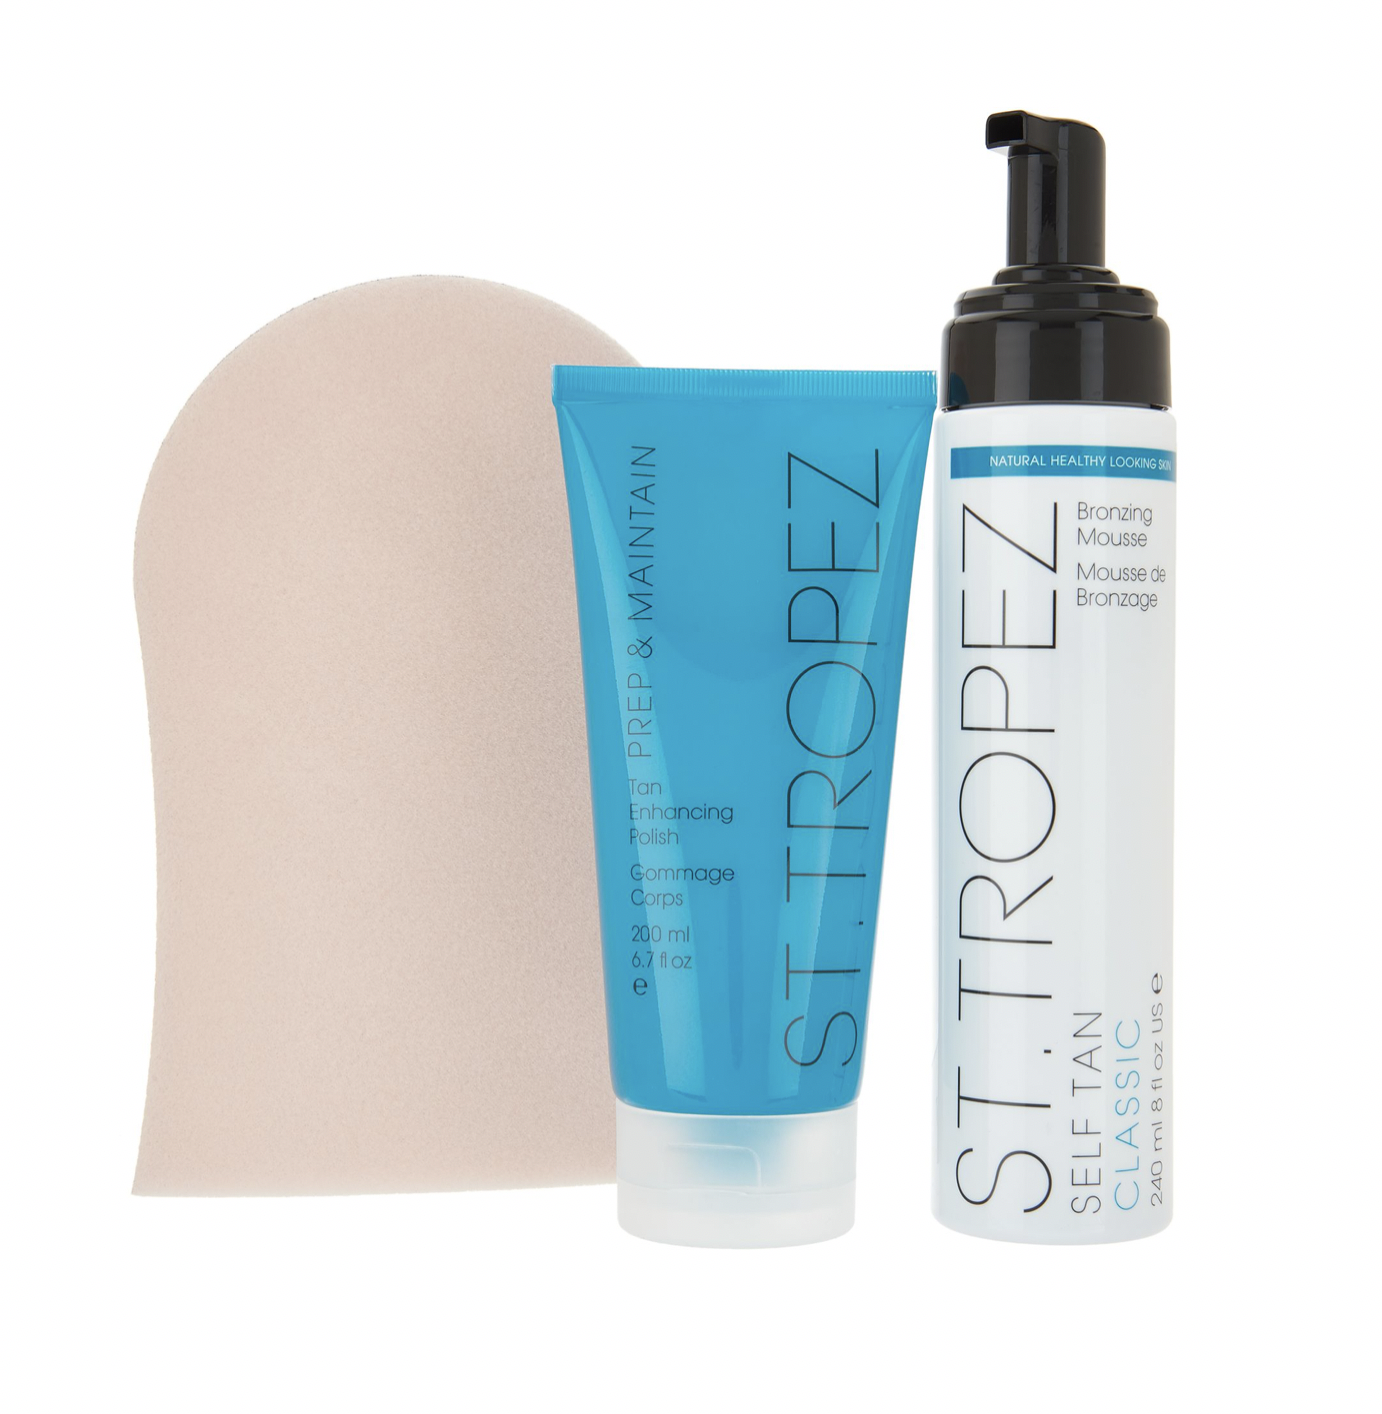 Tanning Mousse and Exfoliation Kit